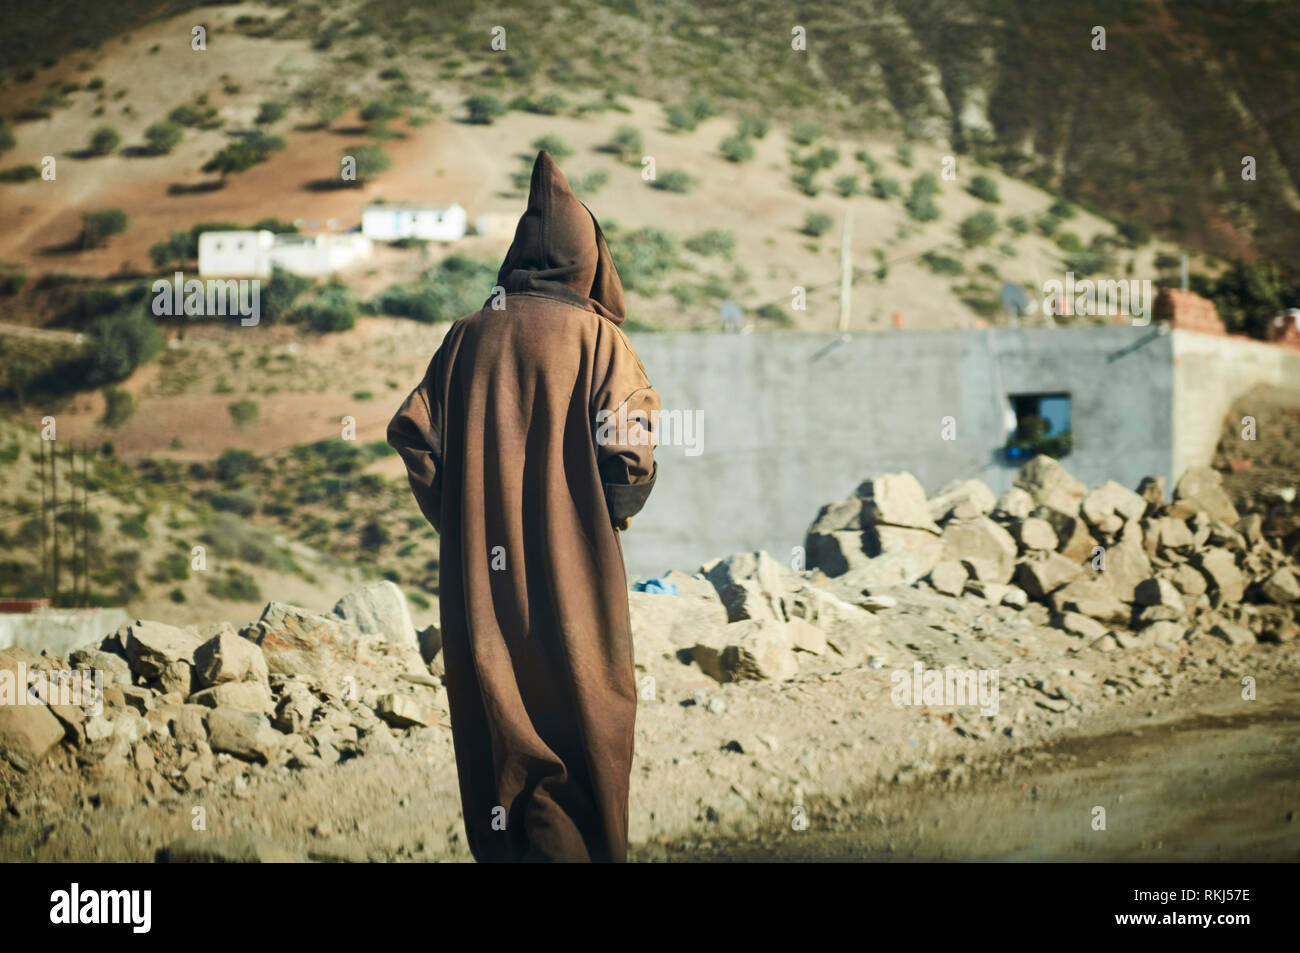 A man wearing a hooded robe called a djellaba or thoub walks along the side  of the road just outside of the town of Chefchaouen Stock Photo - Alamy